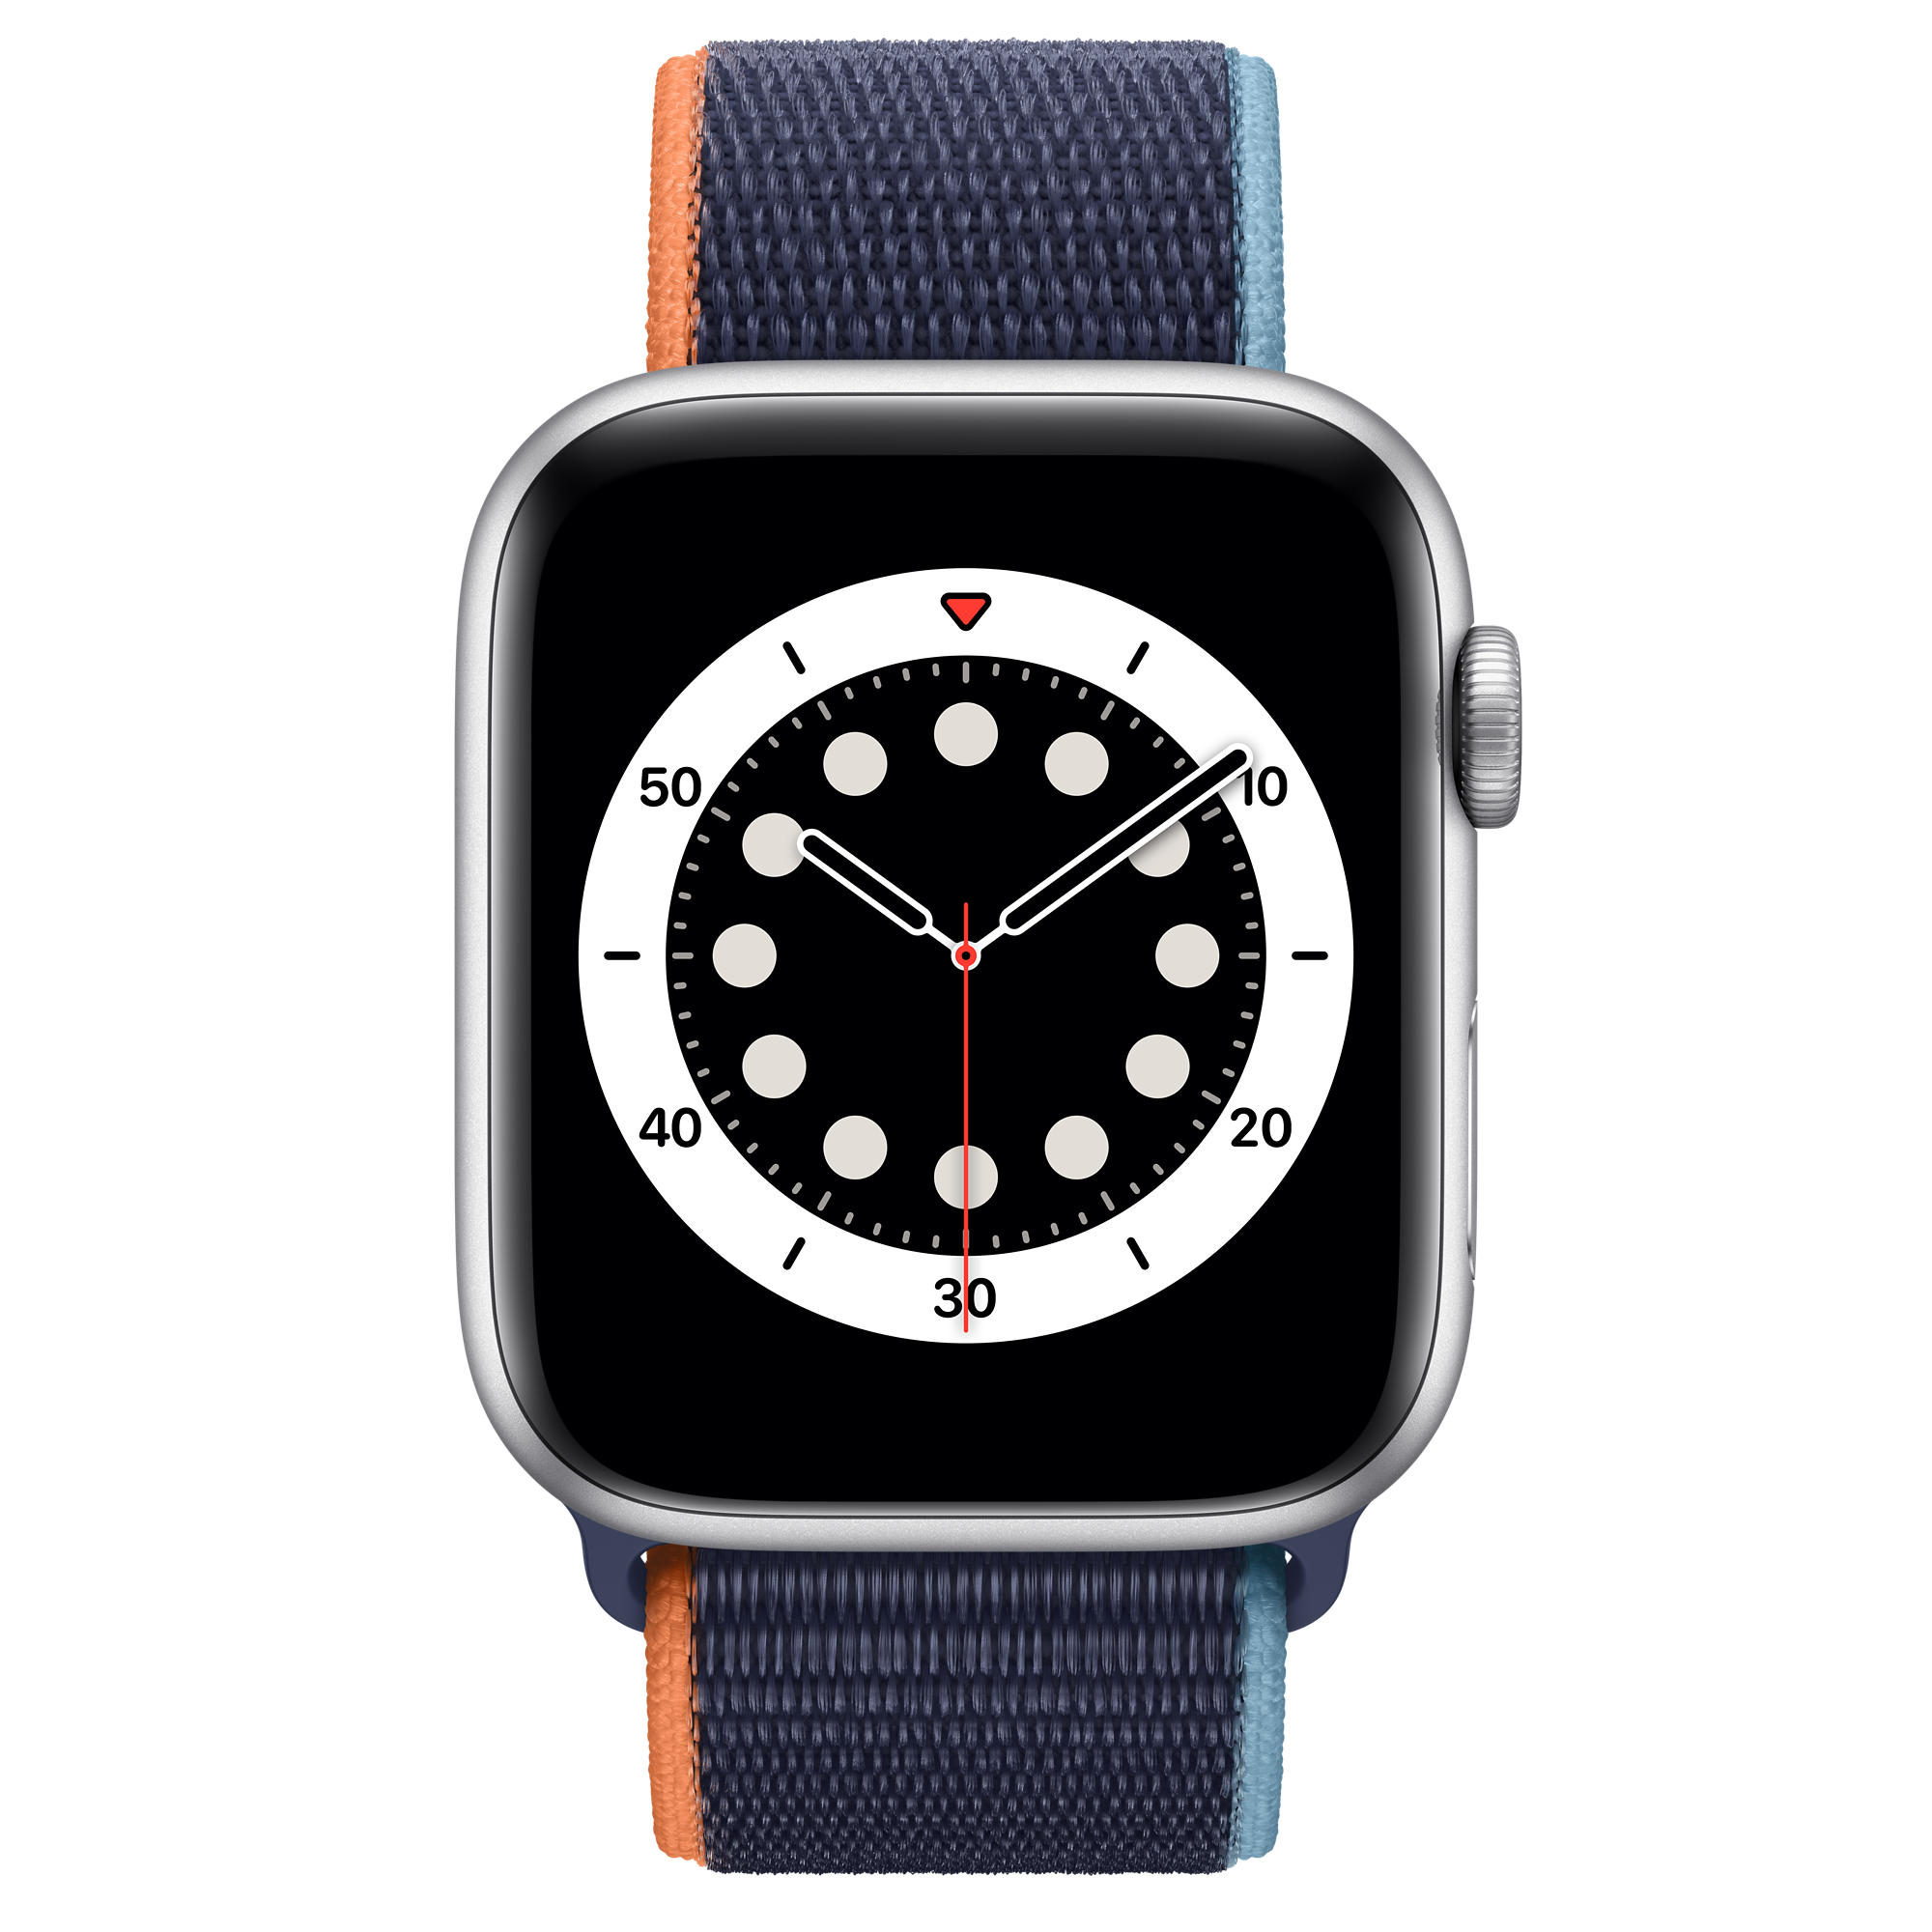 Apple Watch Series 5 PNG Image Transparent Background